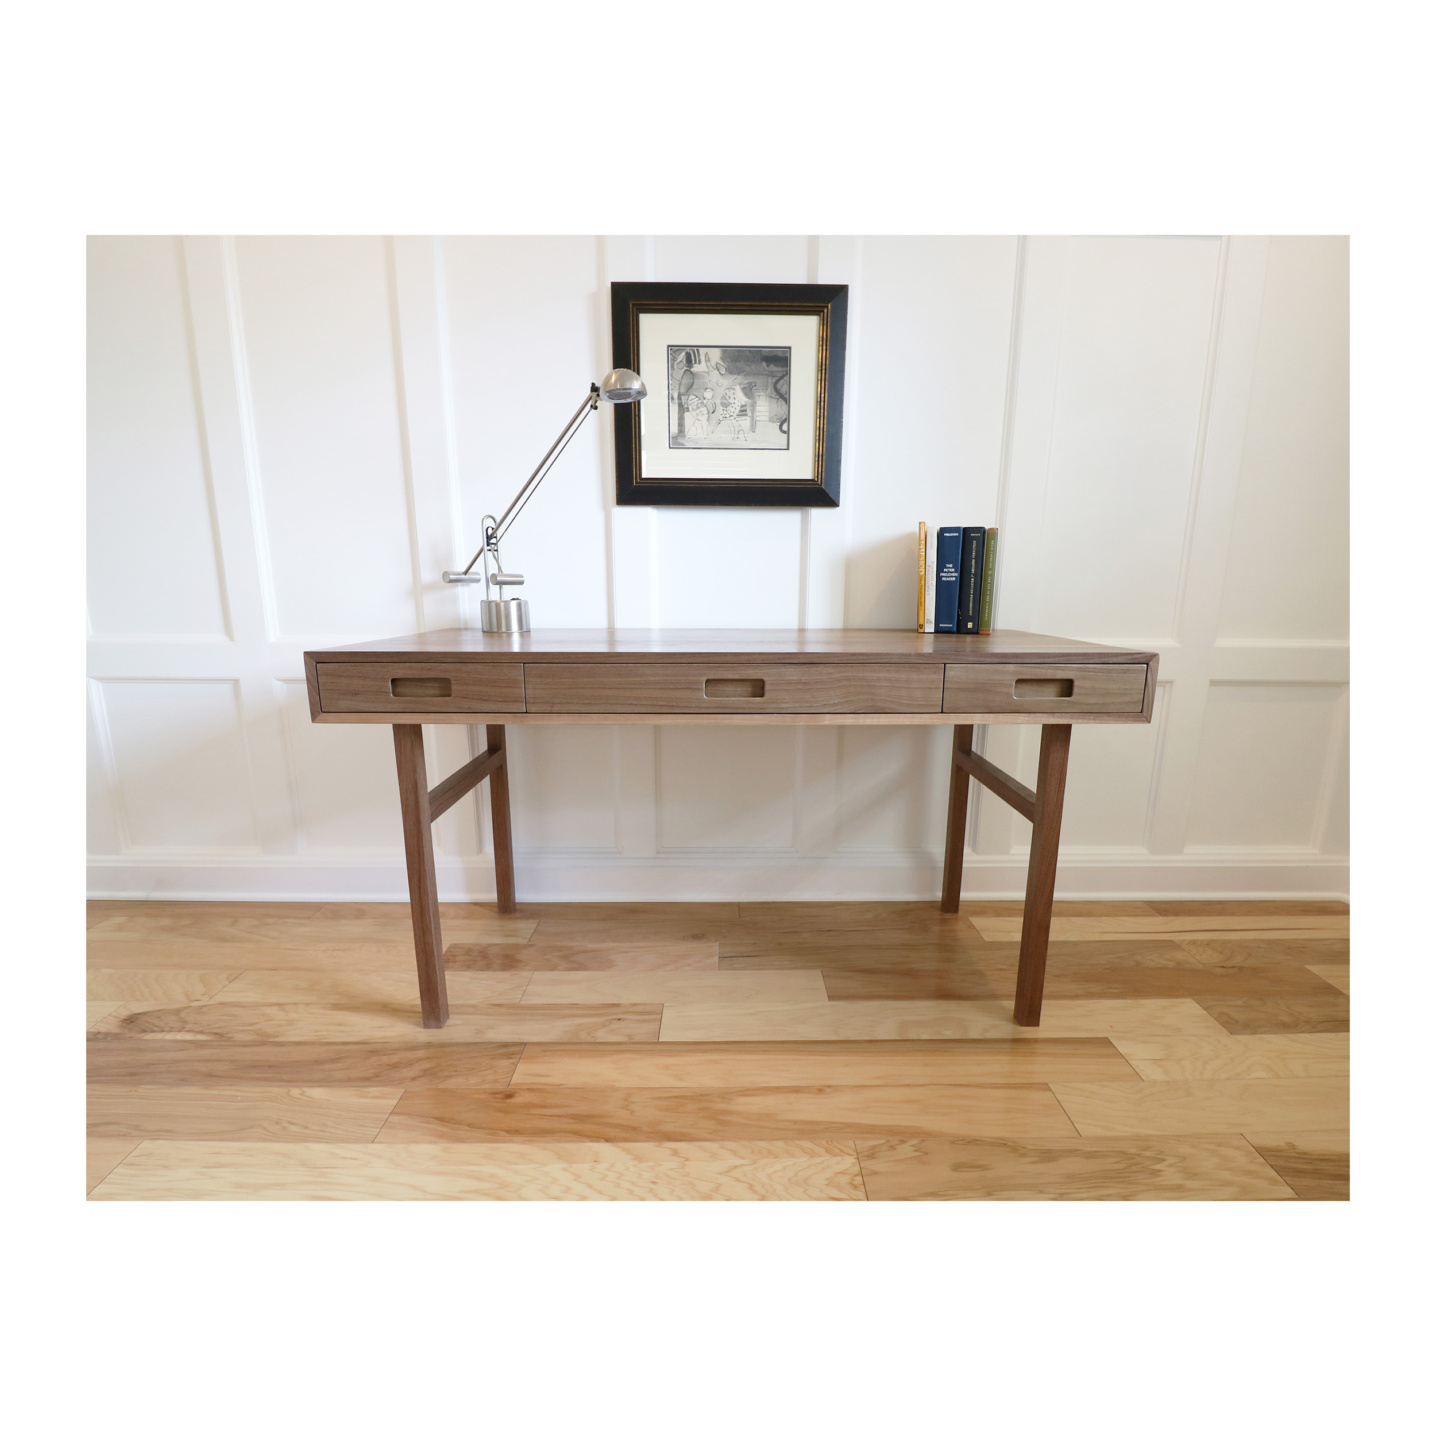 Solid Walnut Desk with a modern design--Made by 57NorthPlank Tailored Modern Furniture